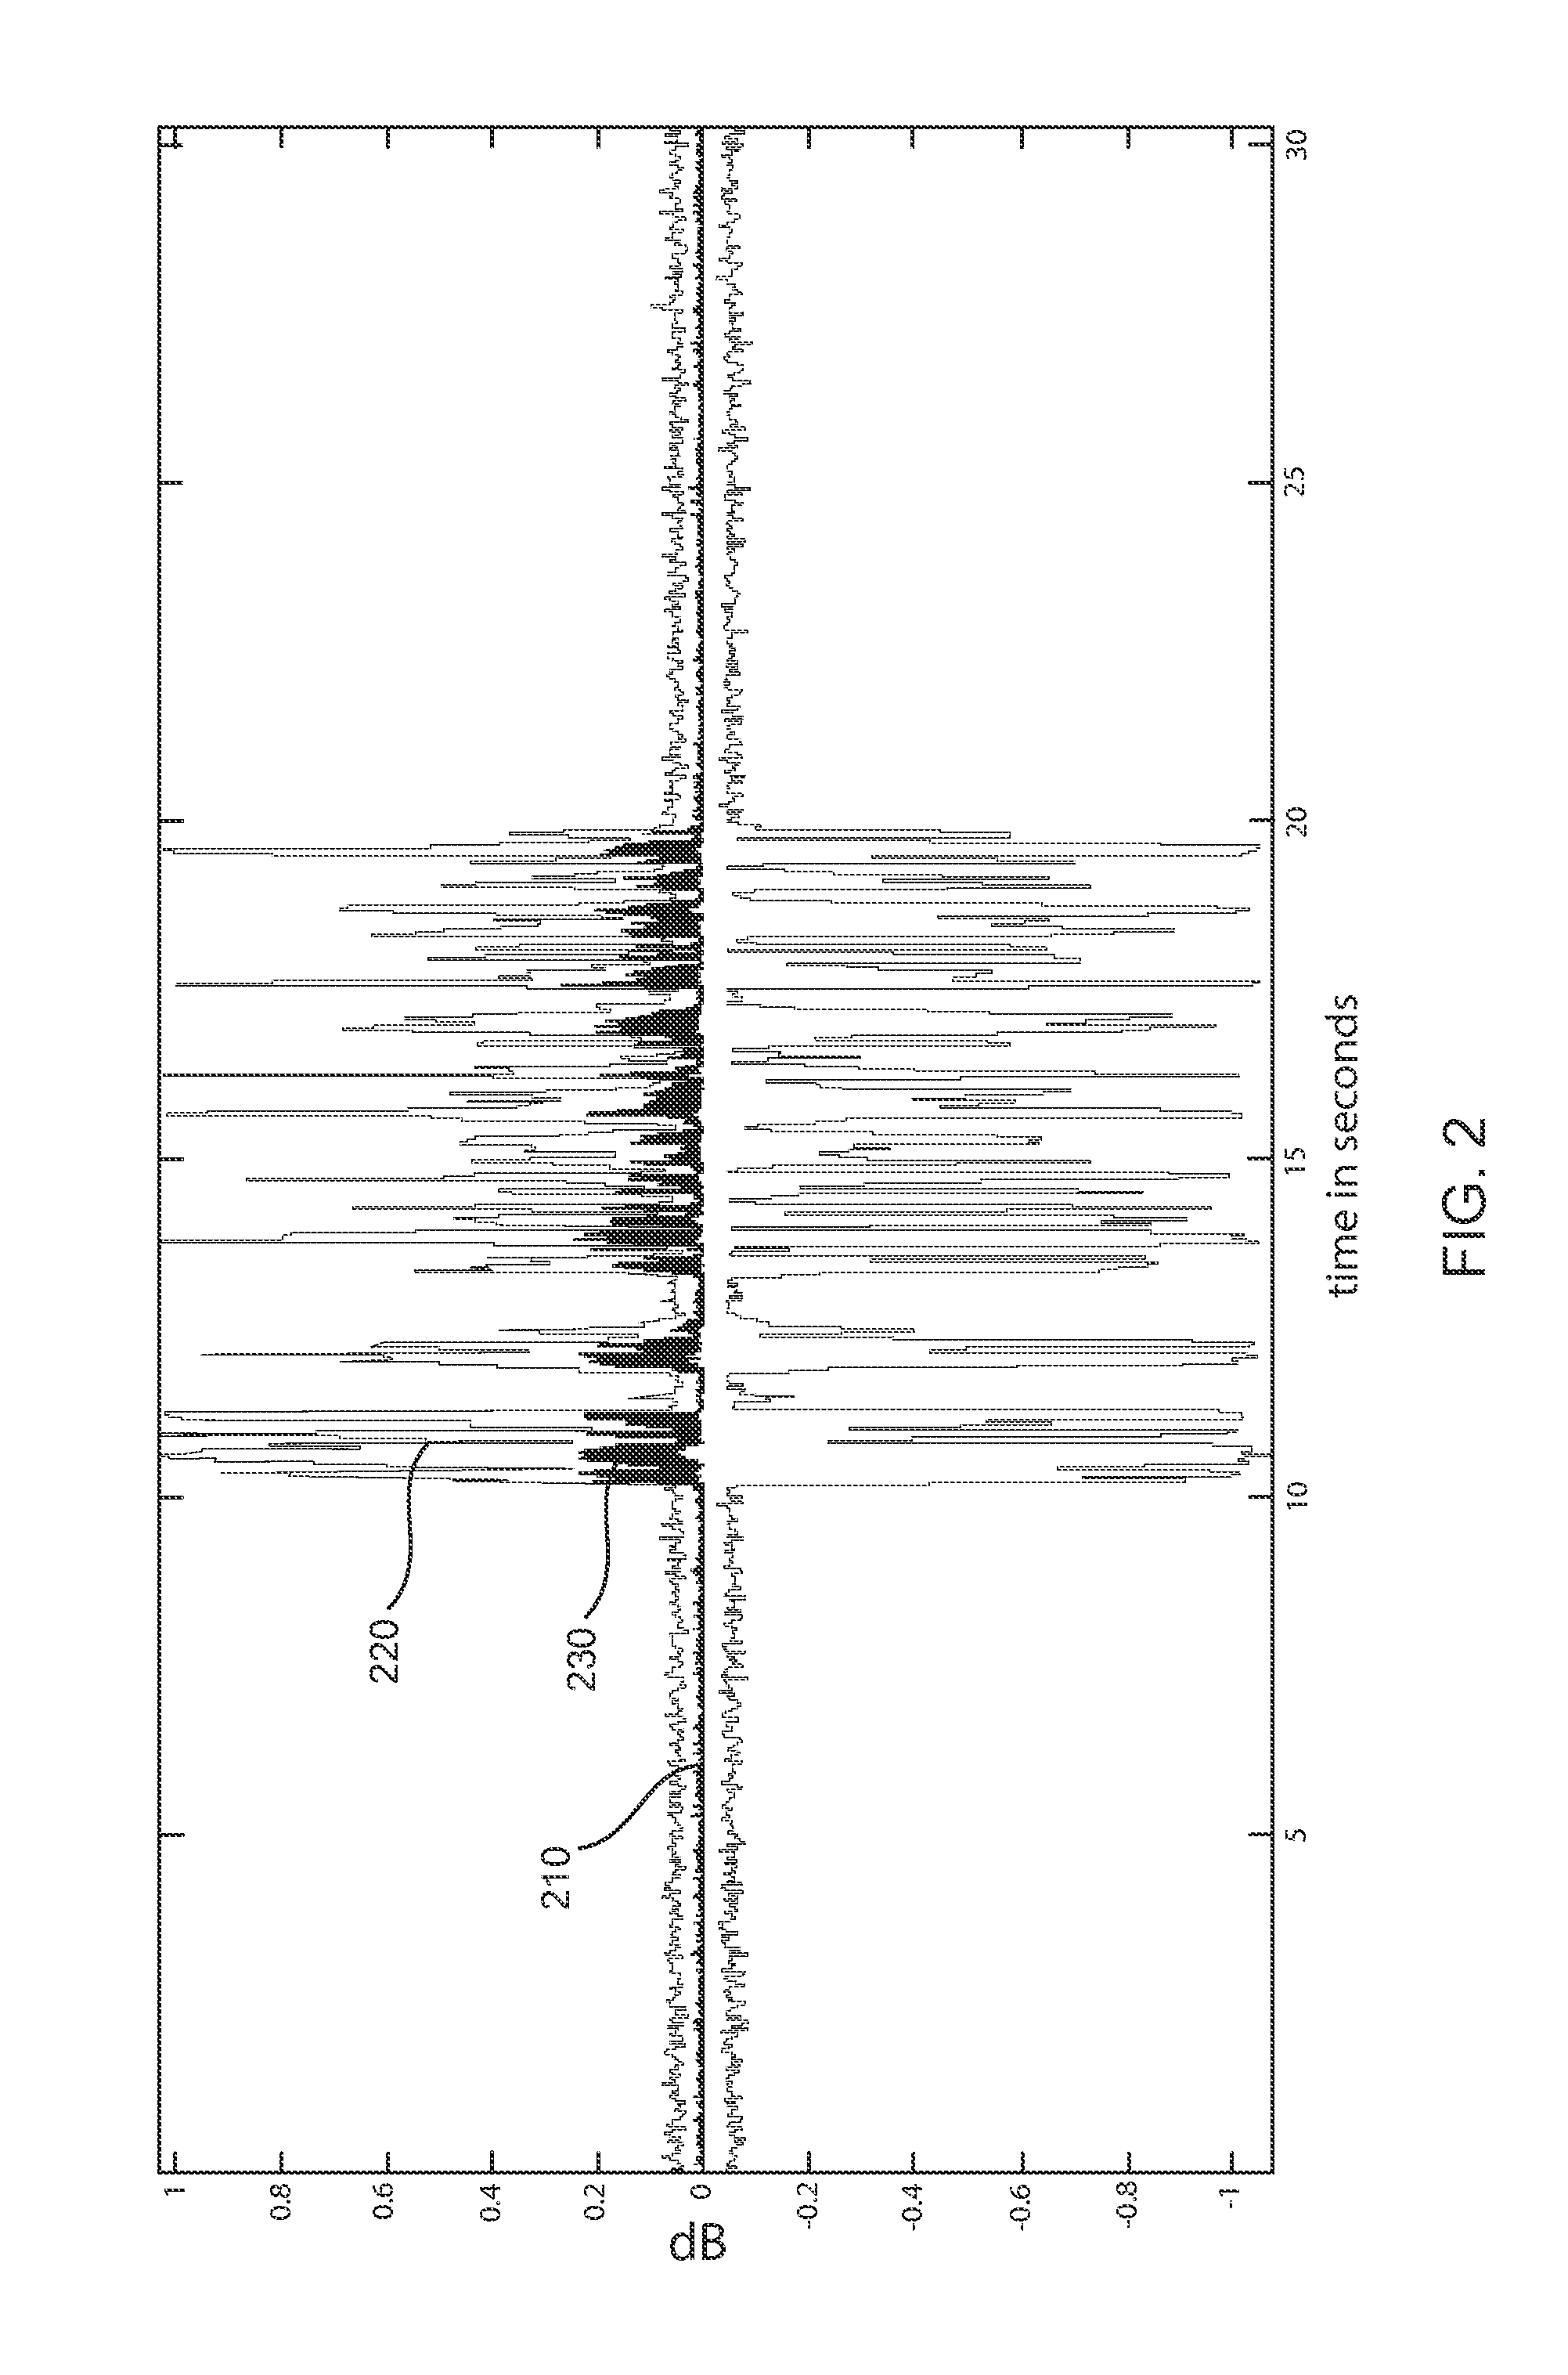 Ambient noise root mean square (RMS) detector